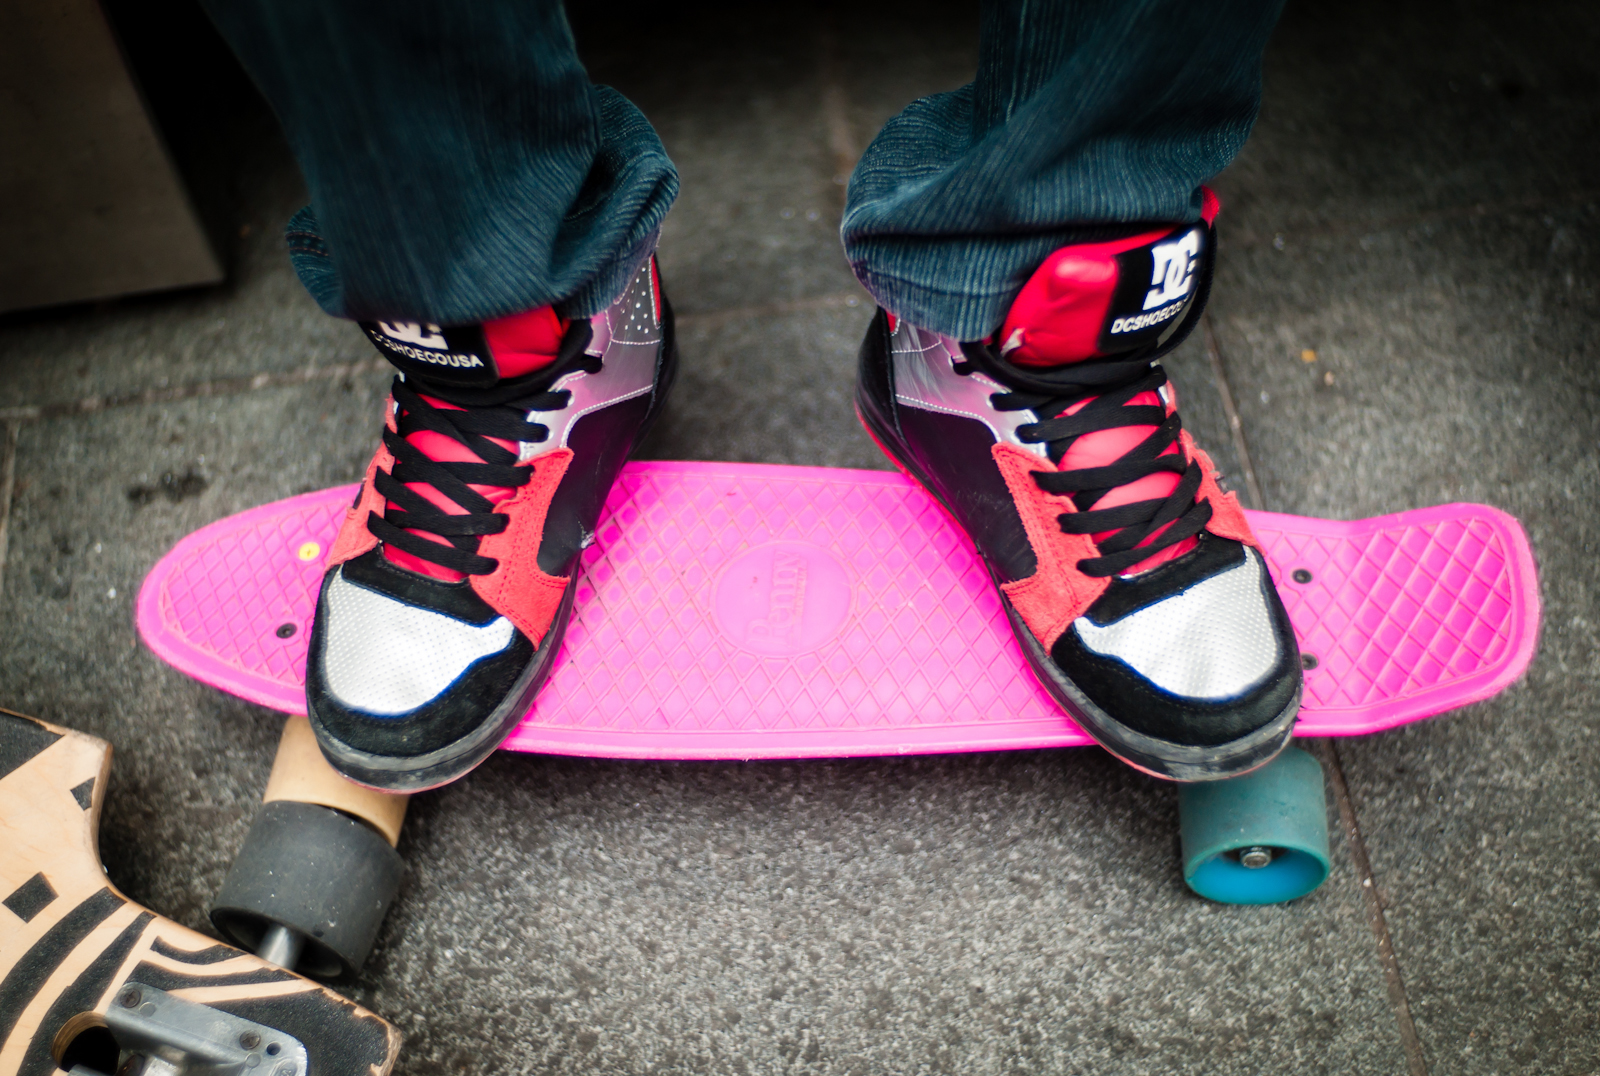 A boy's sneakers and skateboard